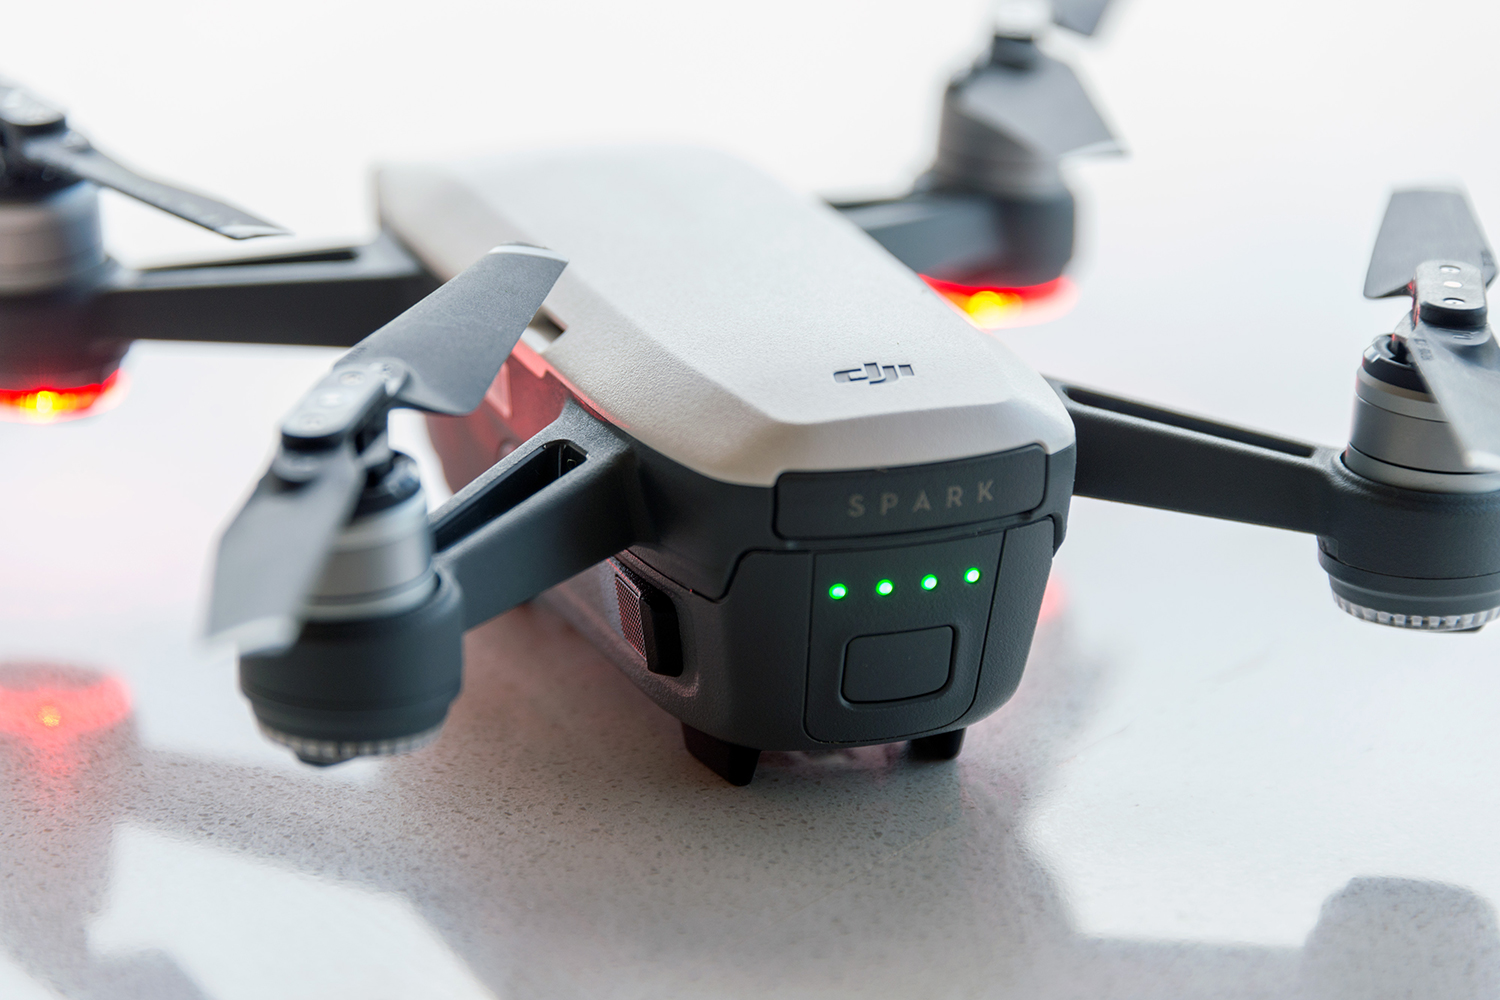 DJI Spark Review: One of the Best Compact Drones You Can Buy